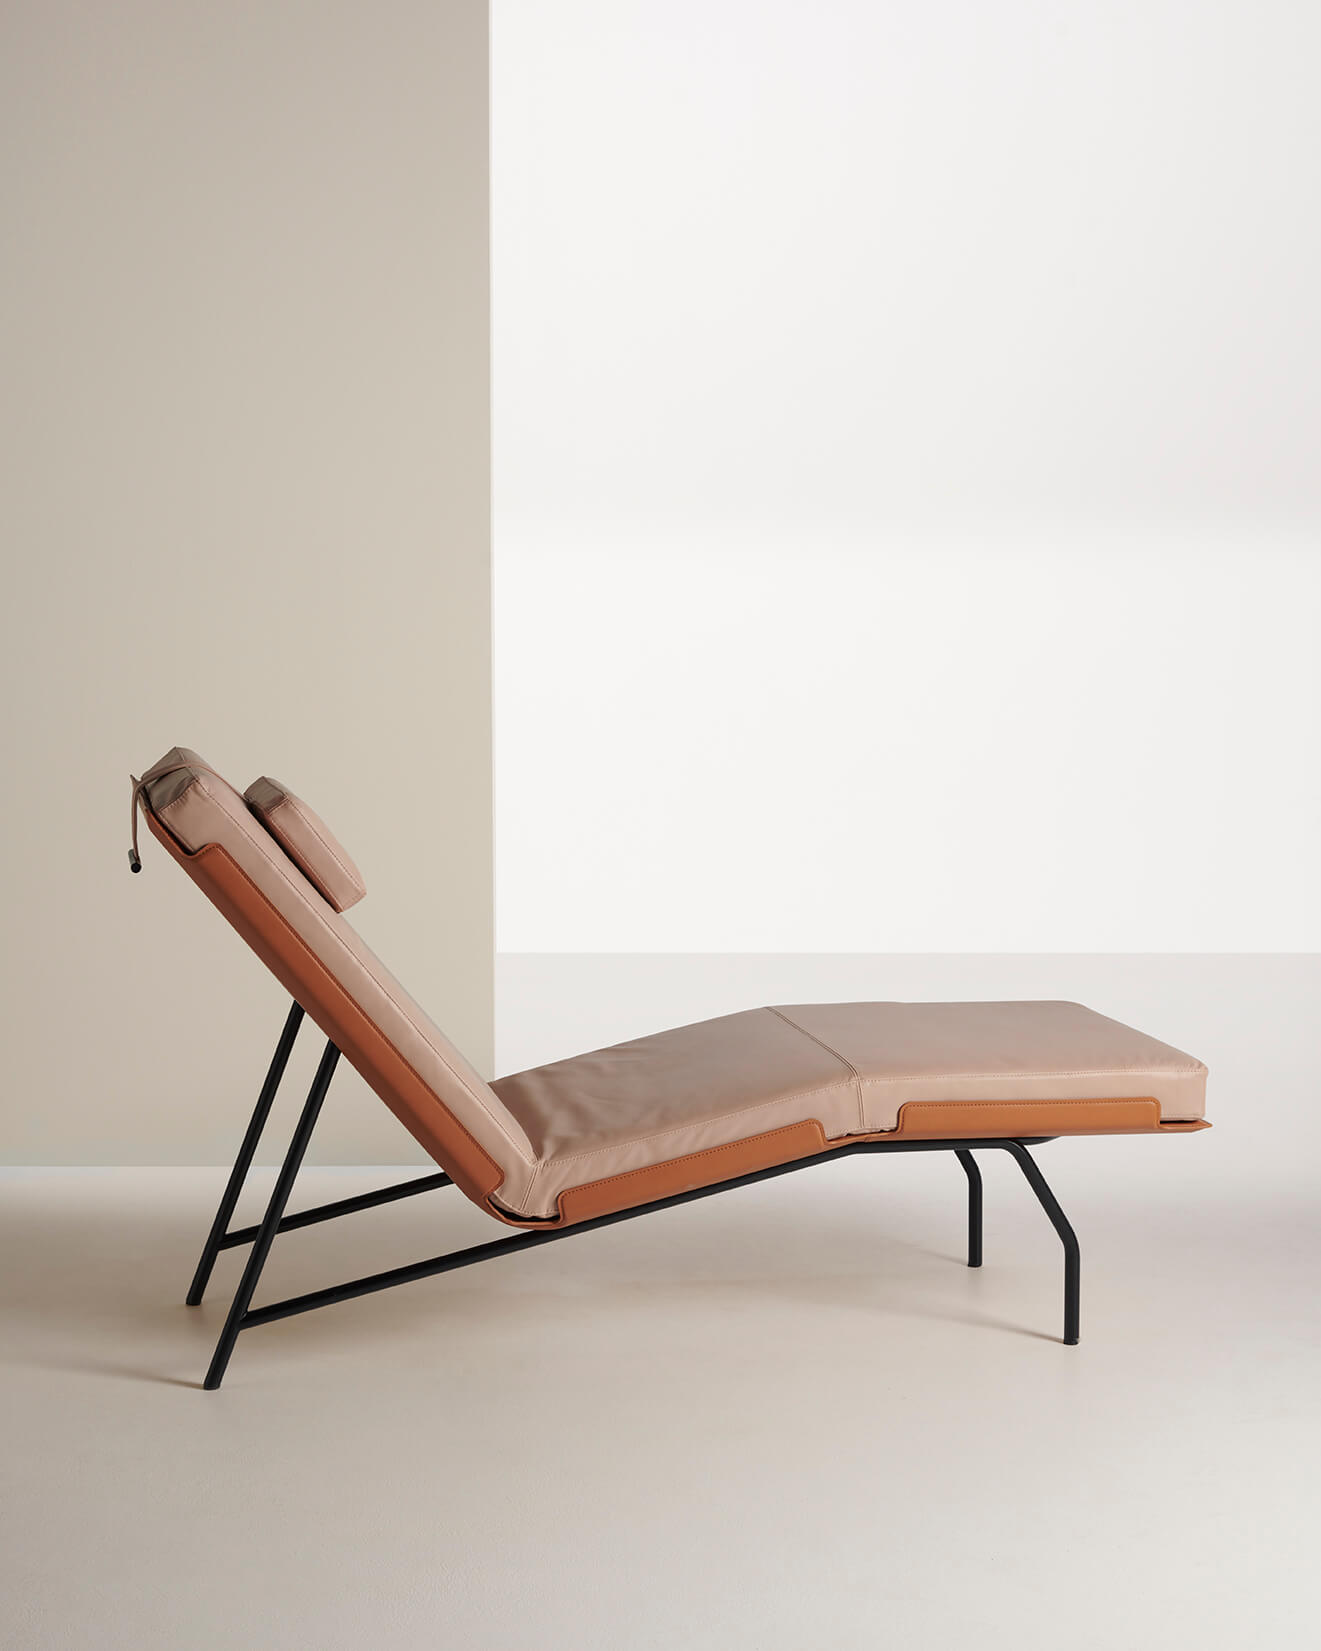 Frag_Caruso chaise longue